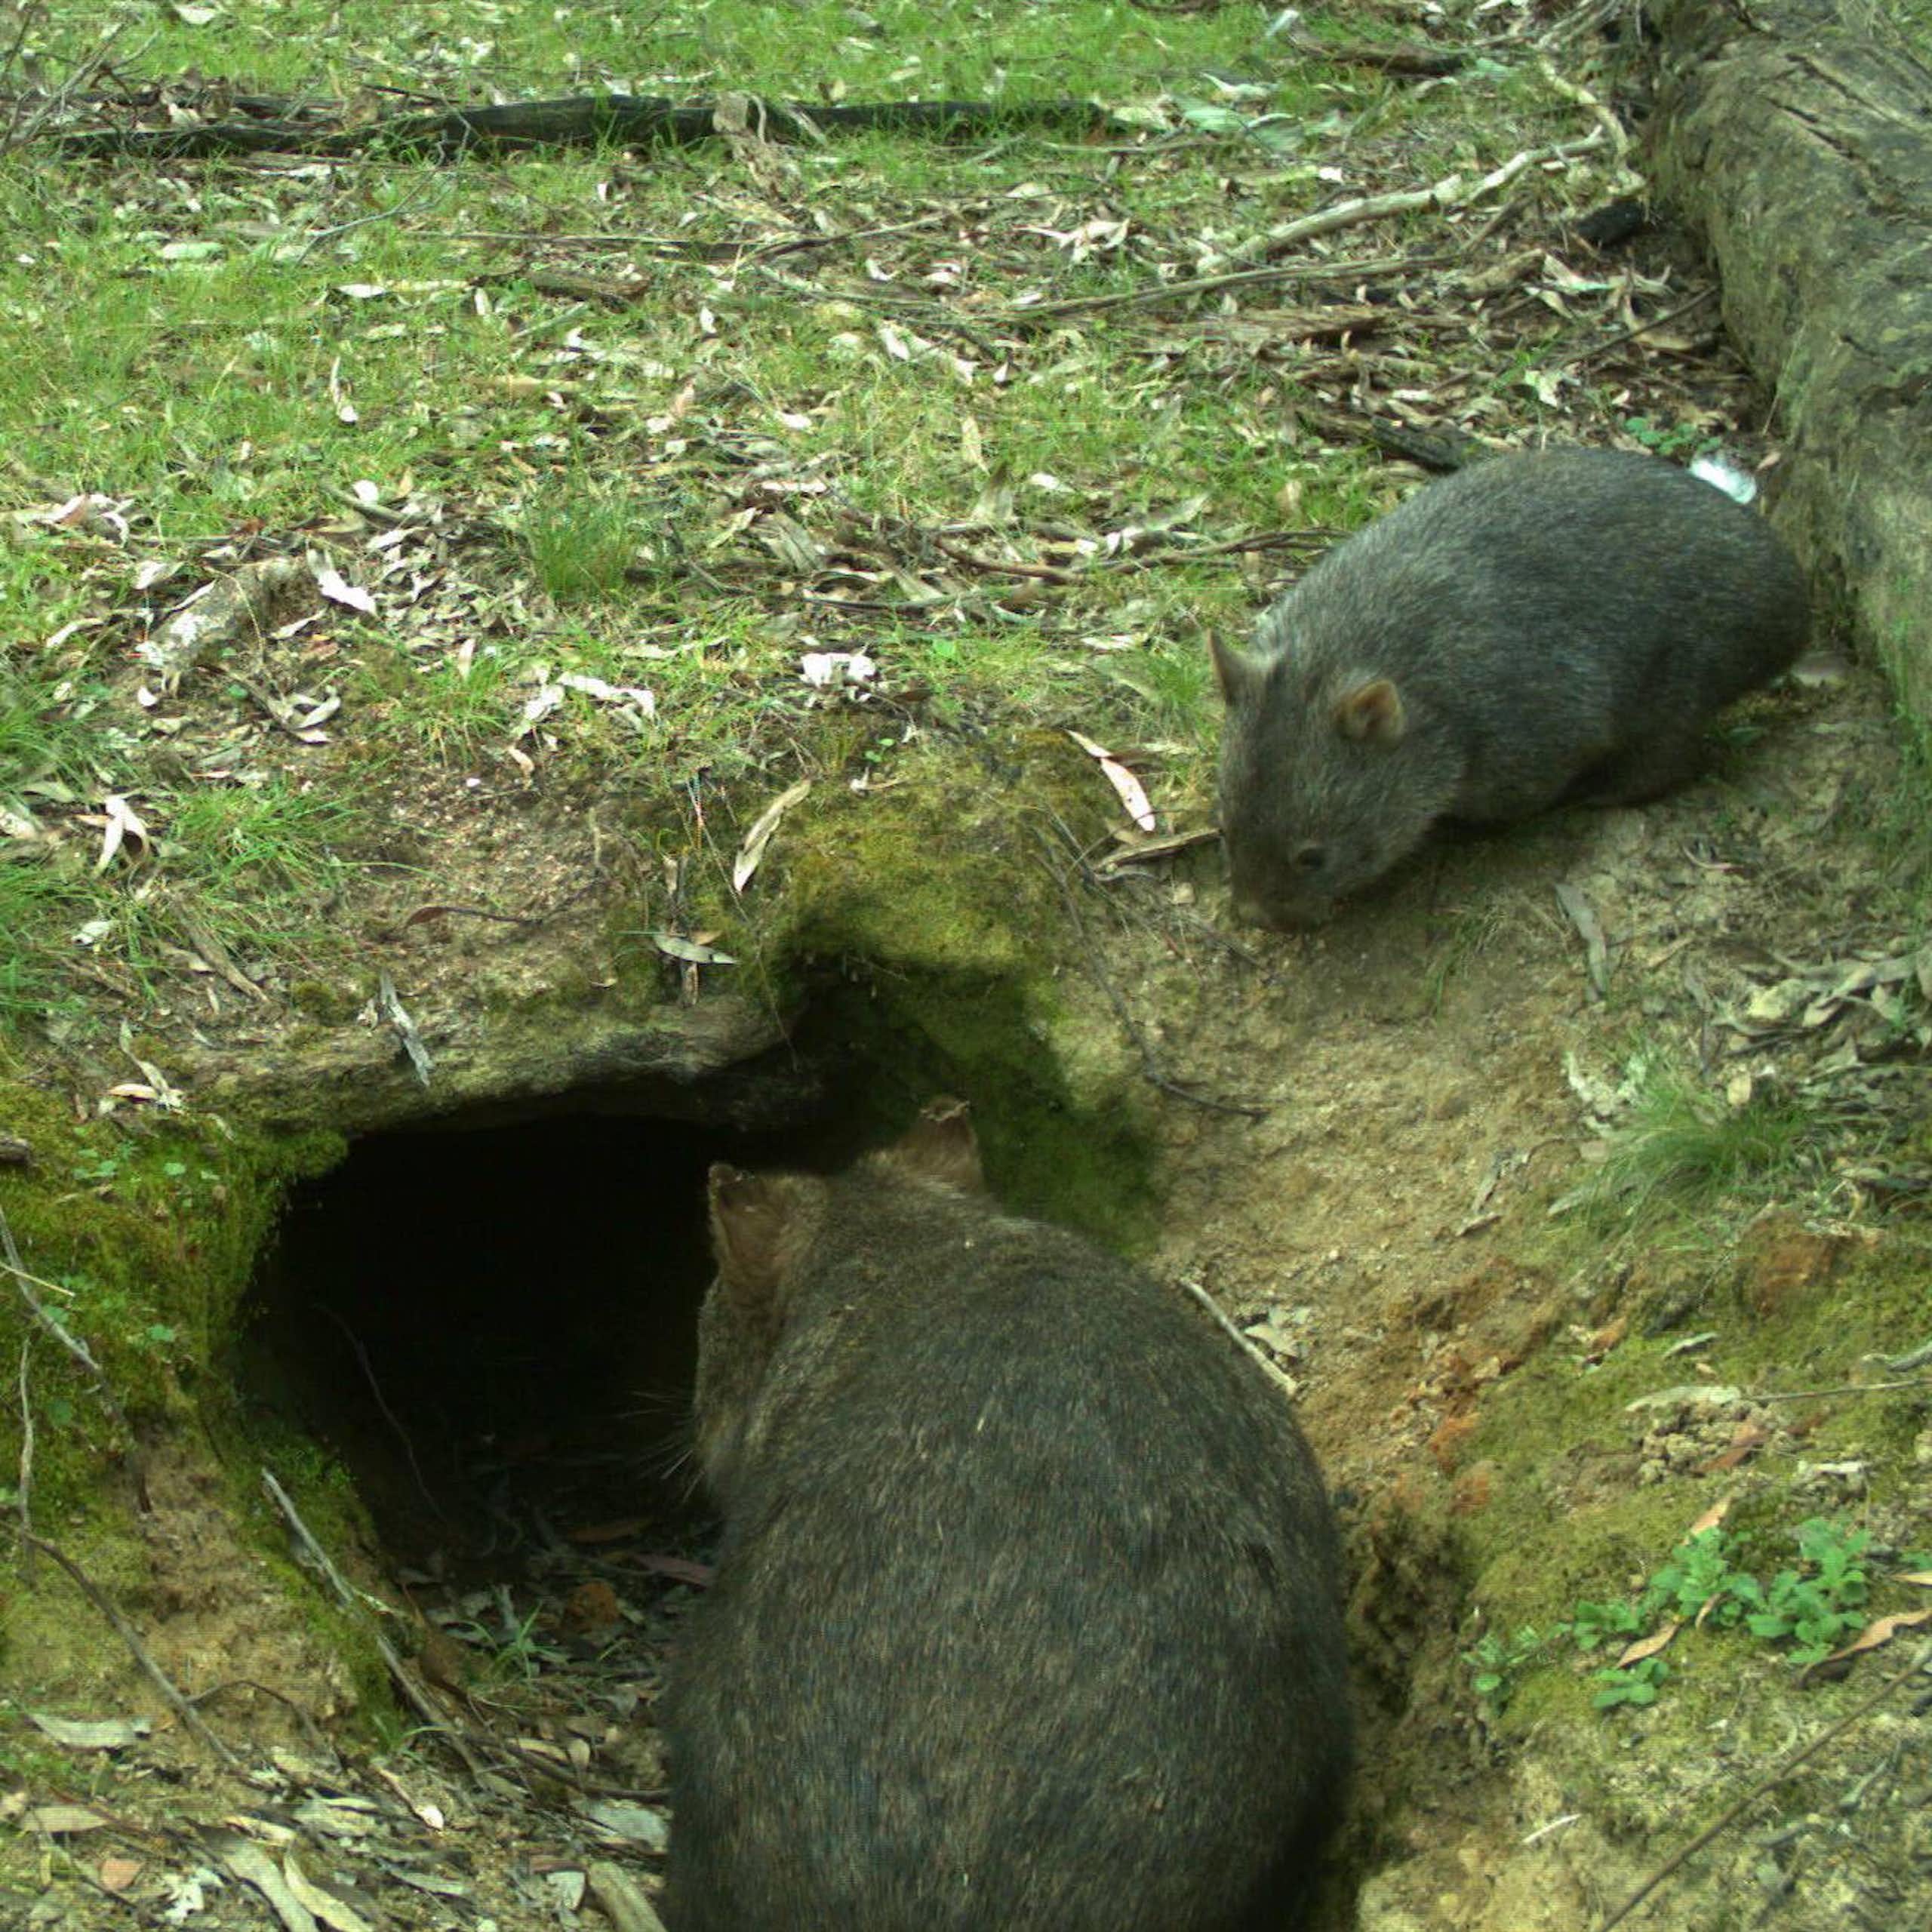 Two common wombats near the entrance of a burrow